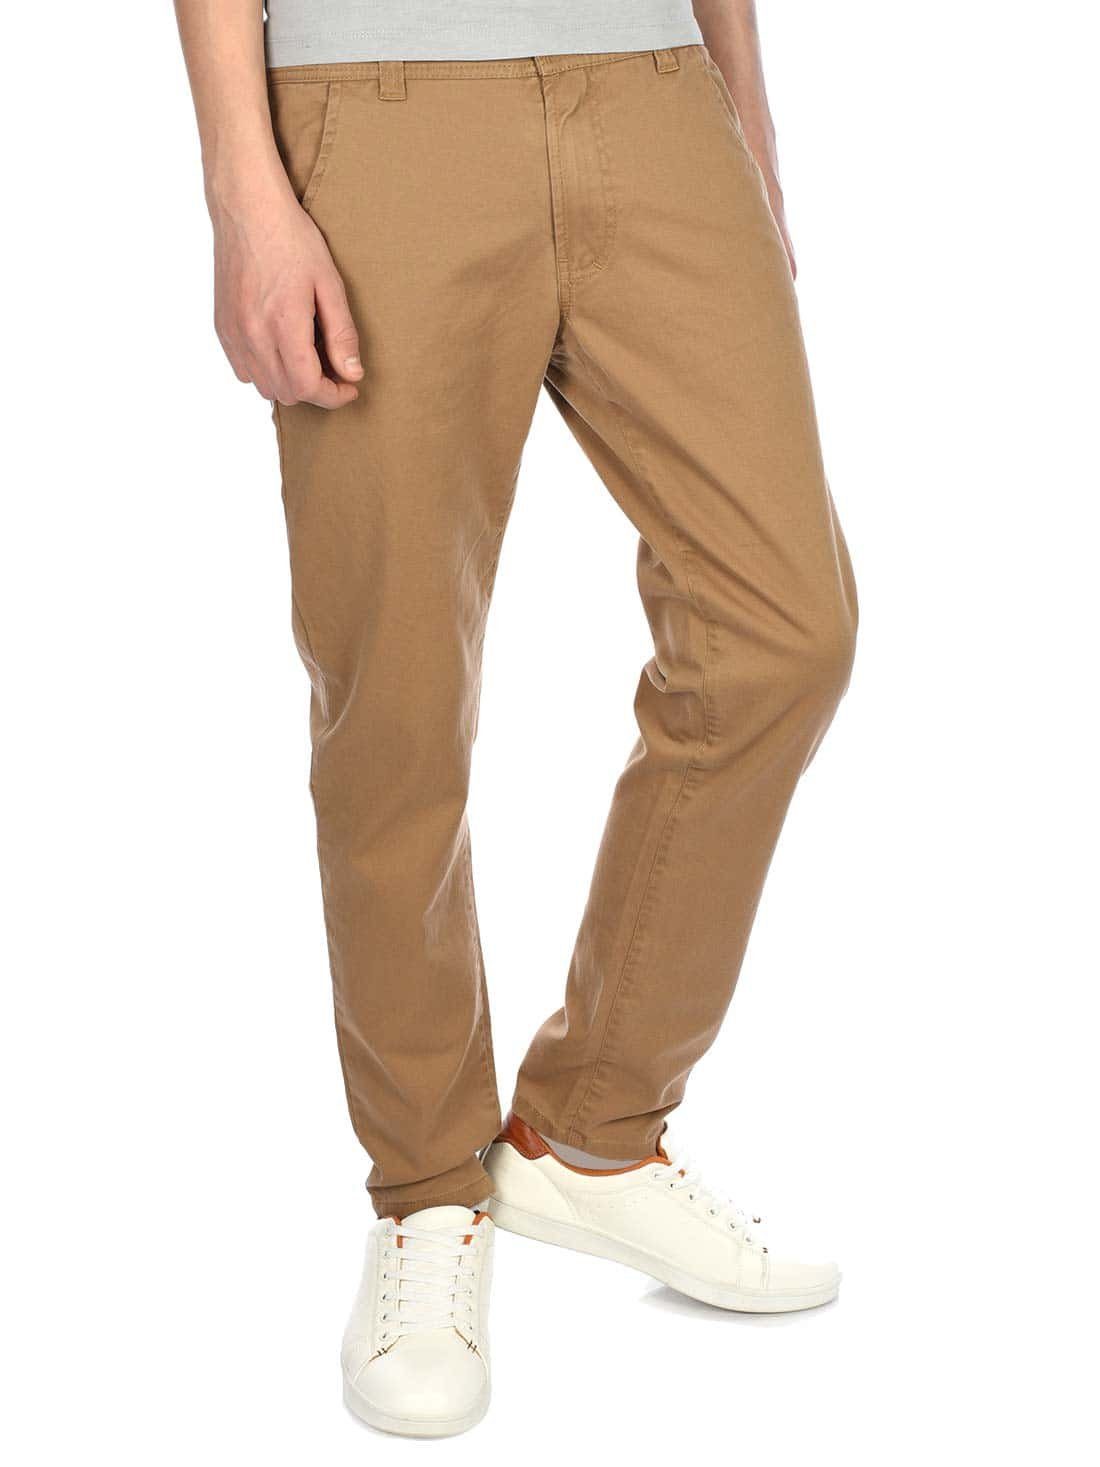 Jungen Beige Chinohose Chino (1-tlg) casual Hose BEZLIT